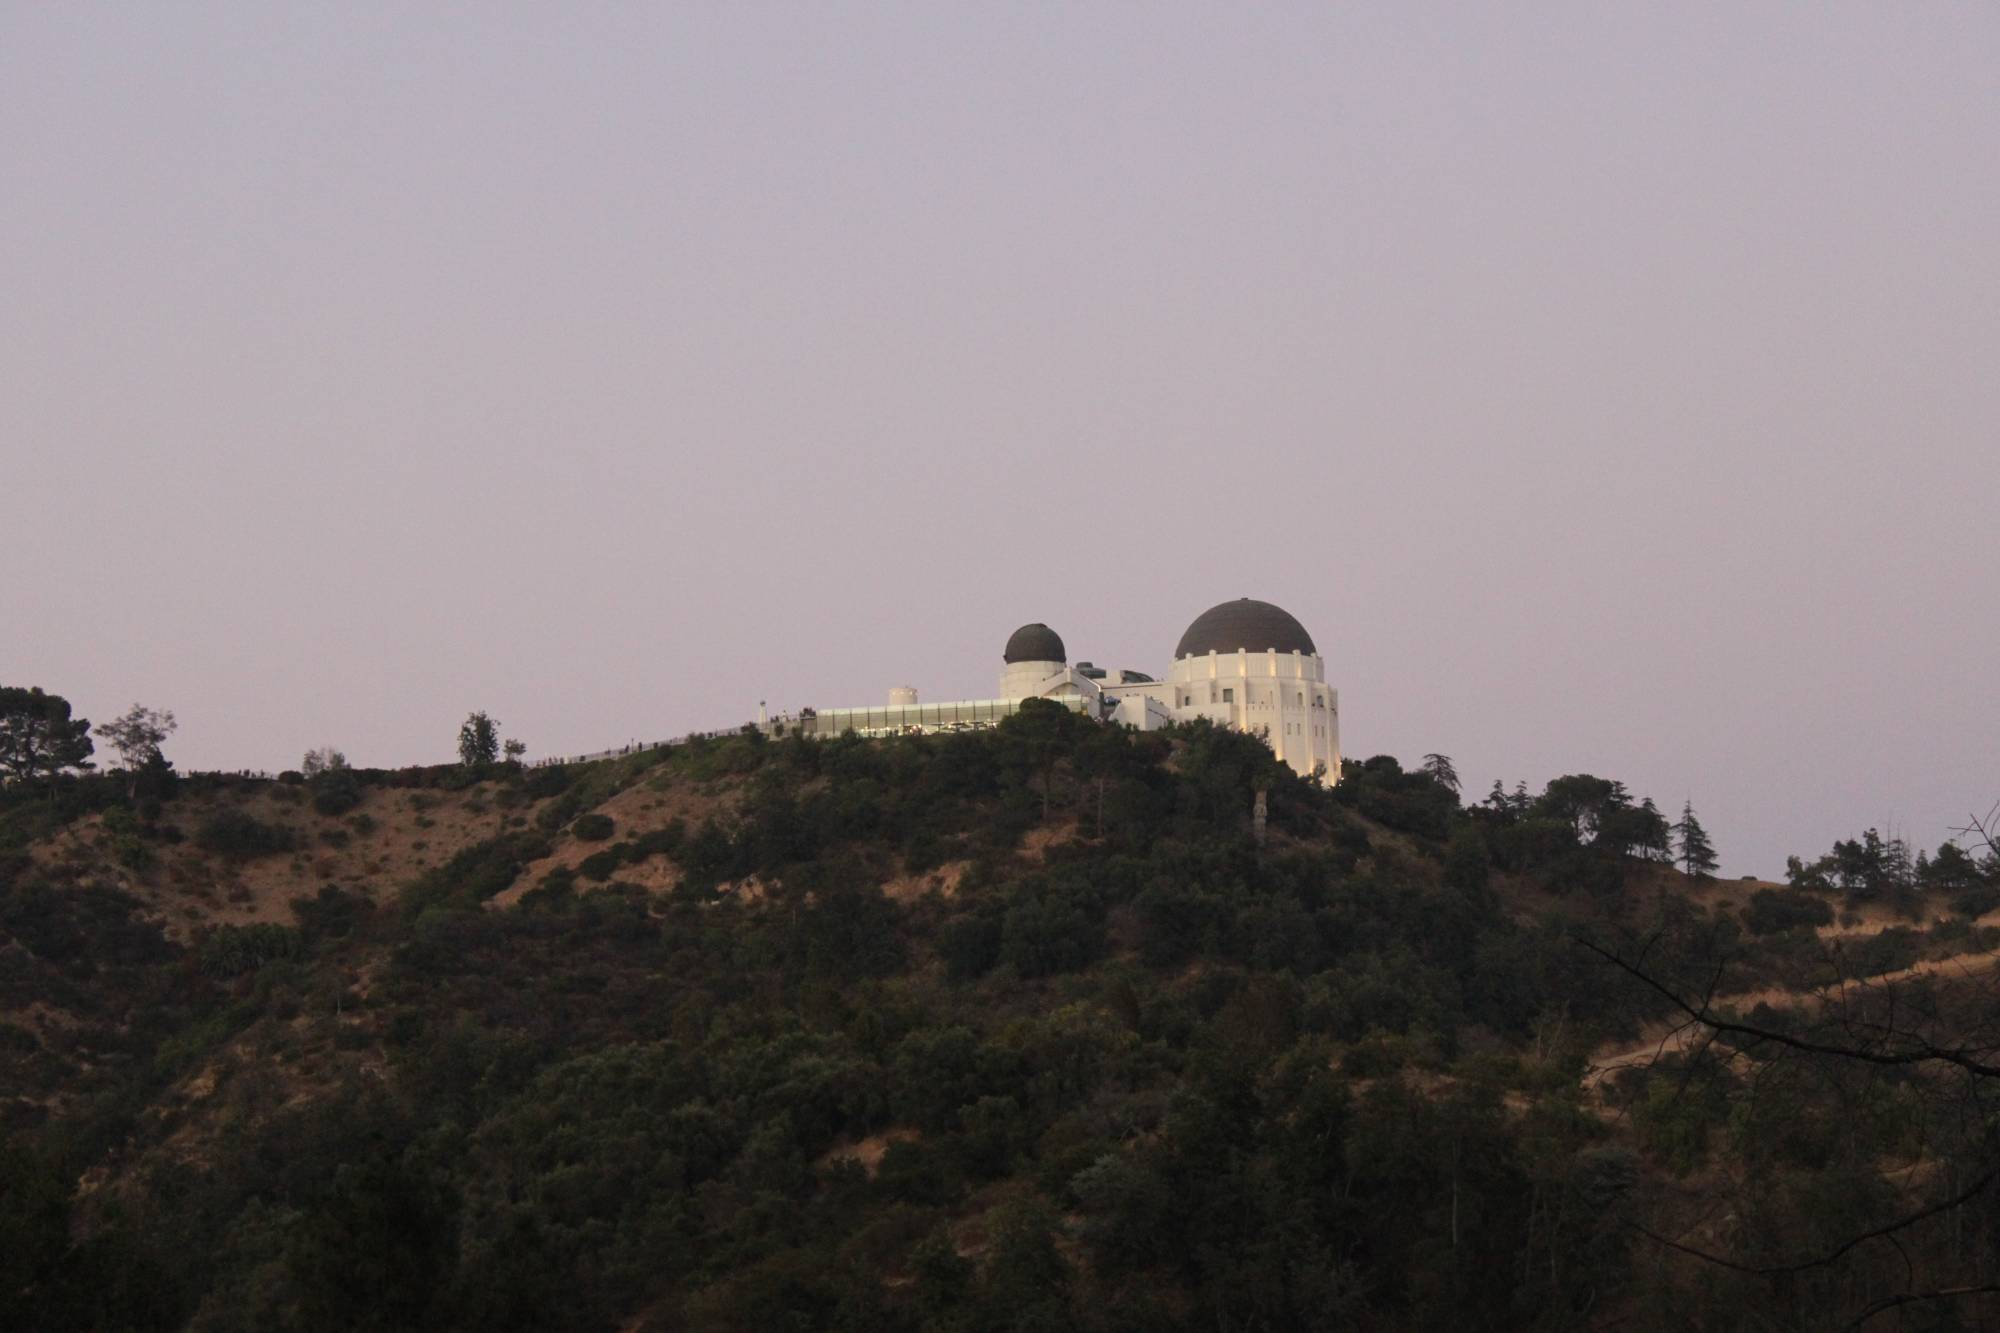 Griffith Observatory - taken from Griffith Park (Los Angeles)